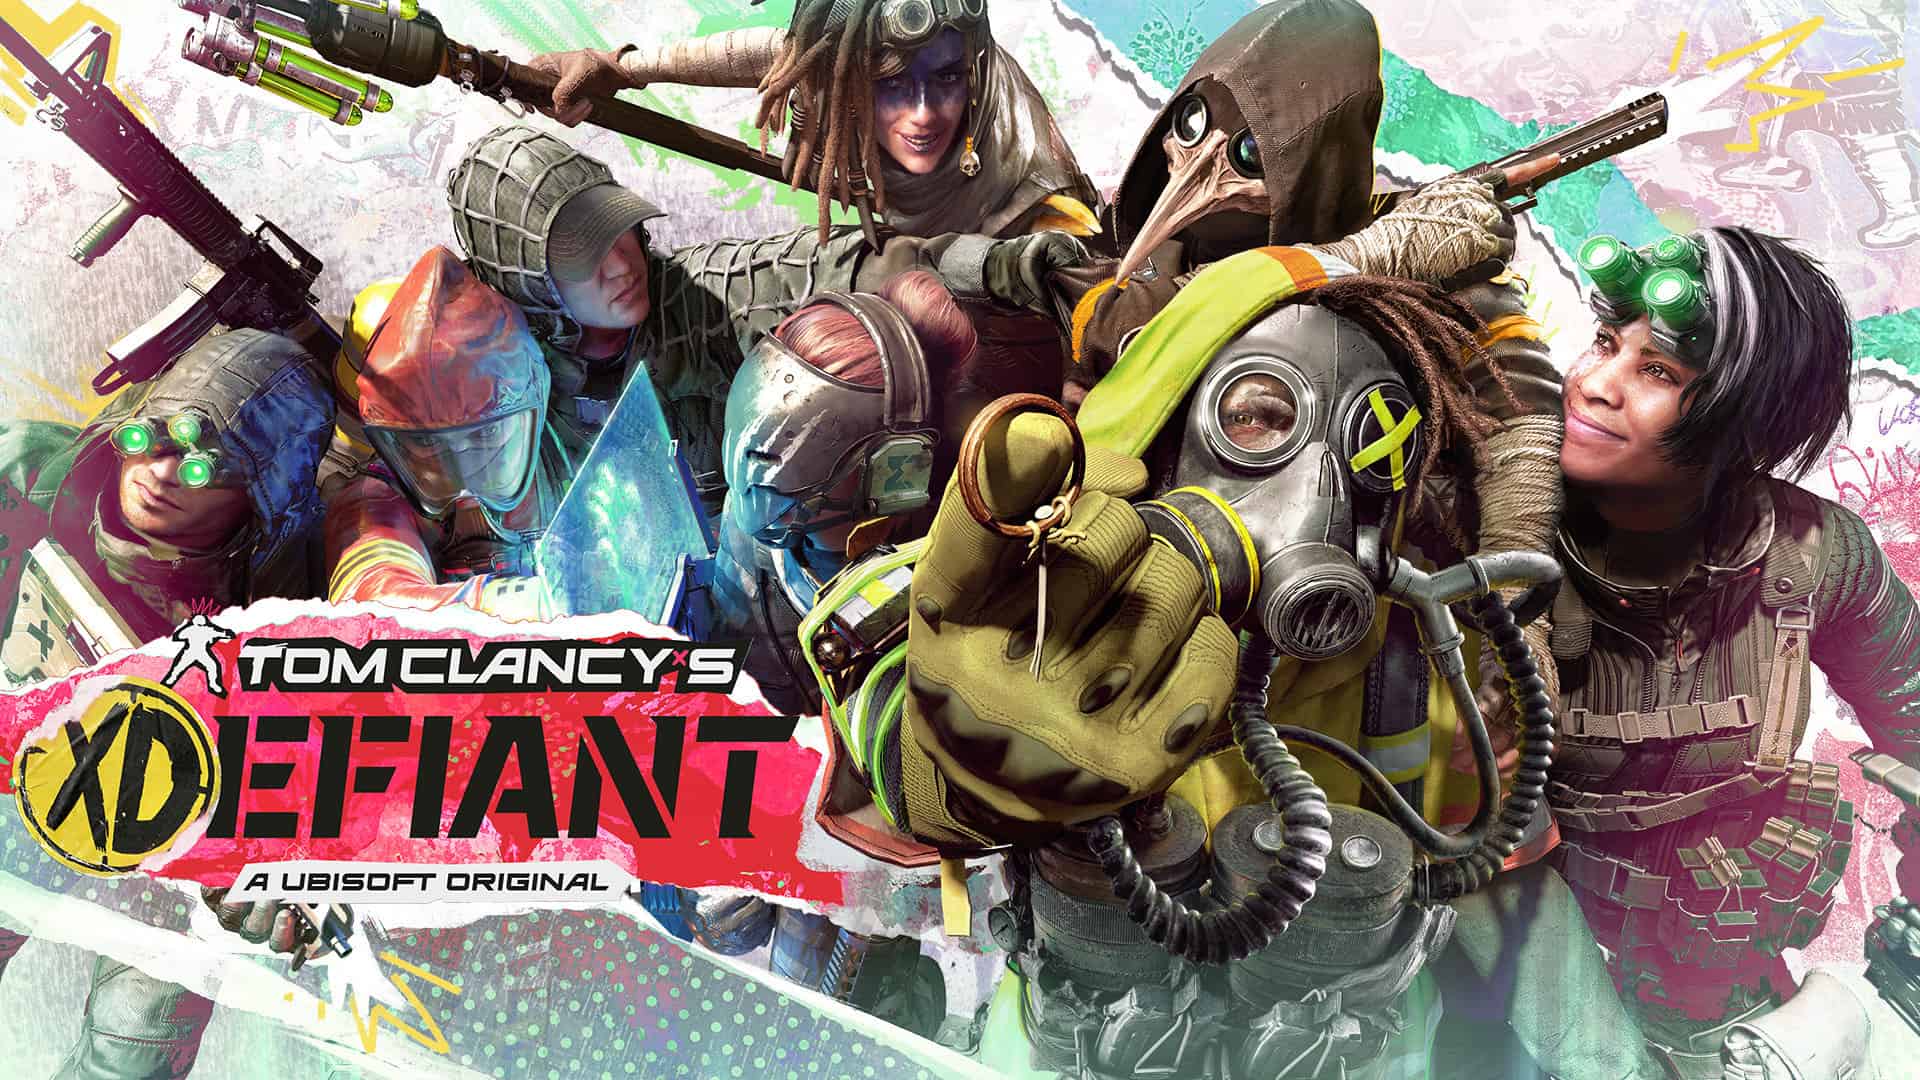 Tom Clancy’s XDefiant revealed as a free-to-play Tom Clancy crossover FPS